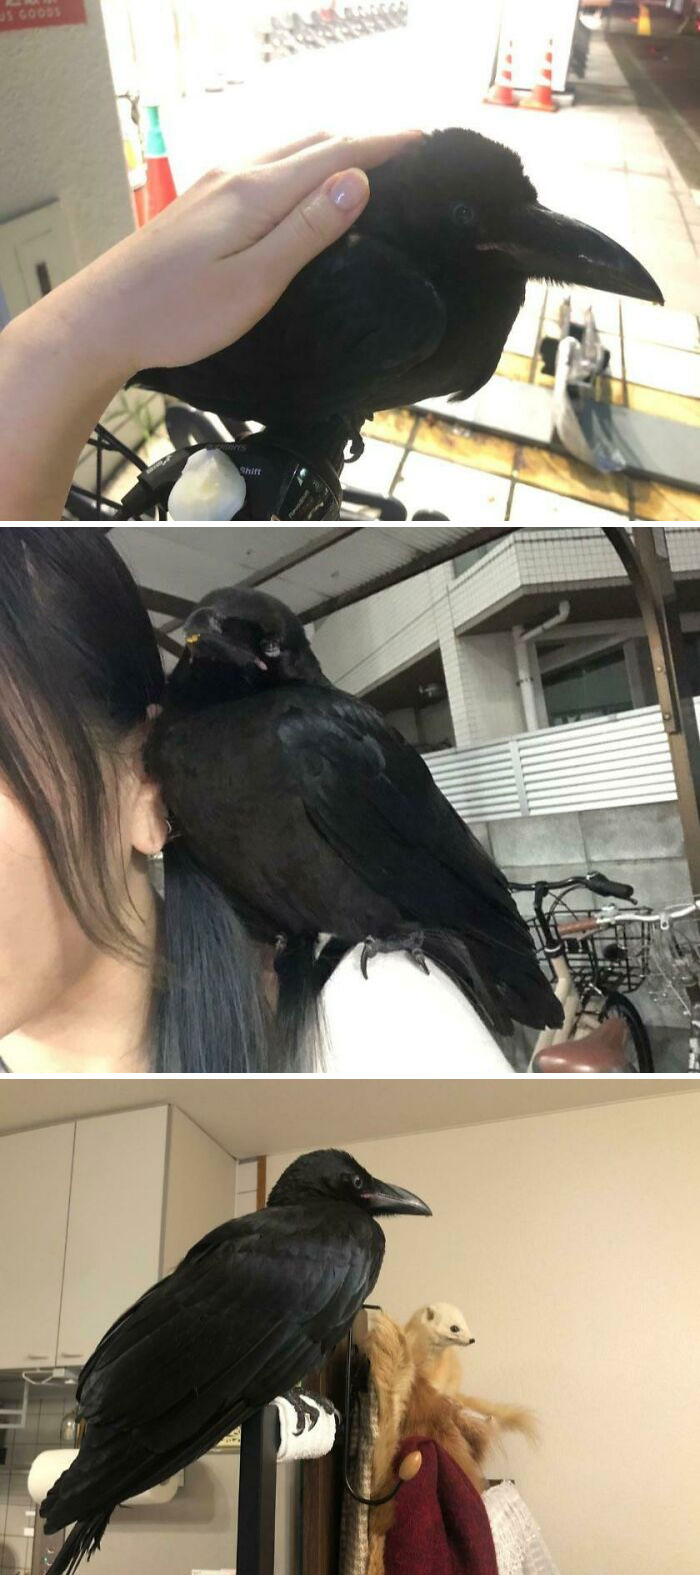 Pictures of woman petting a crow and crow standing on shoulder